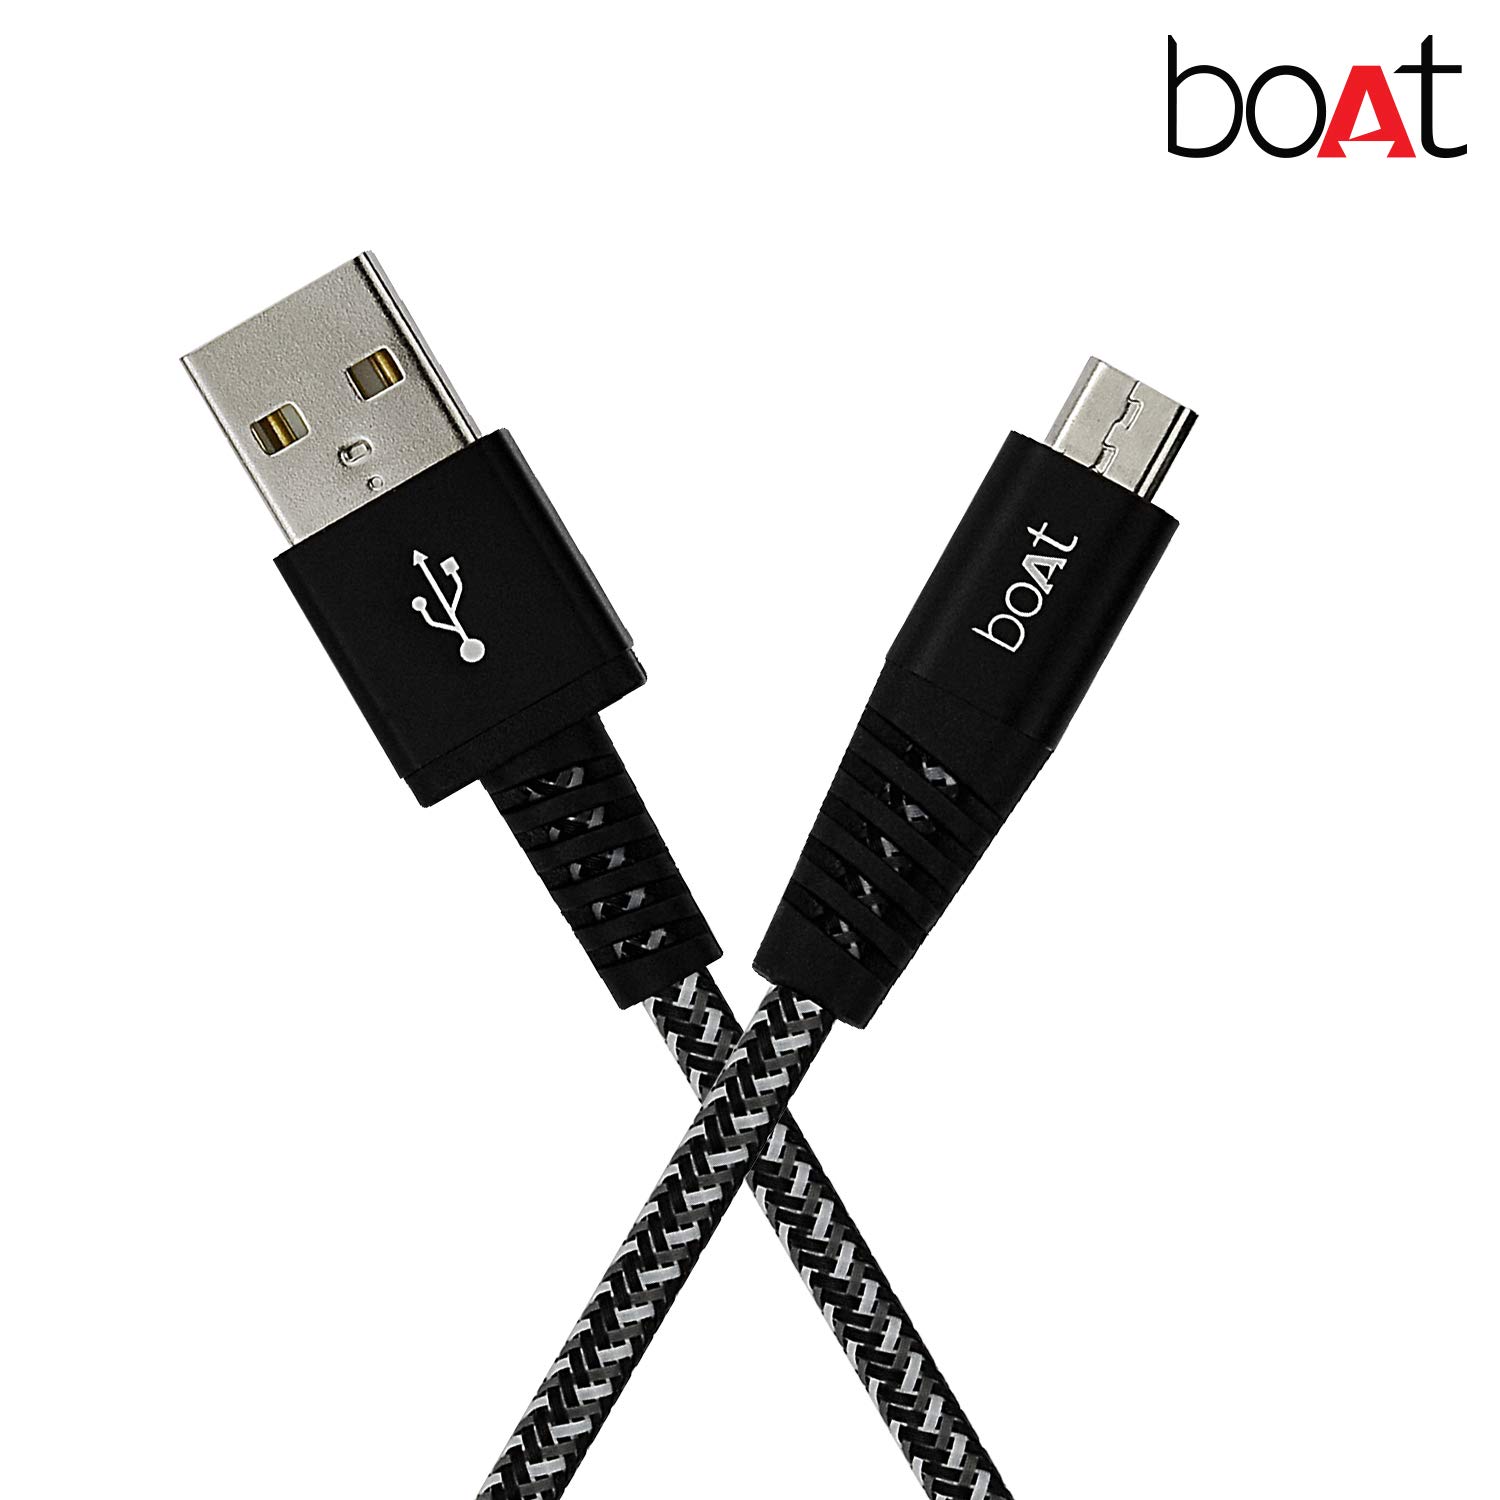 boAt Rugged v3 Extra Tough Unbreakable Braided Micro USB Cable 1.5 Meter + 2 Years Warranty